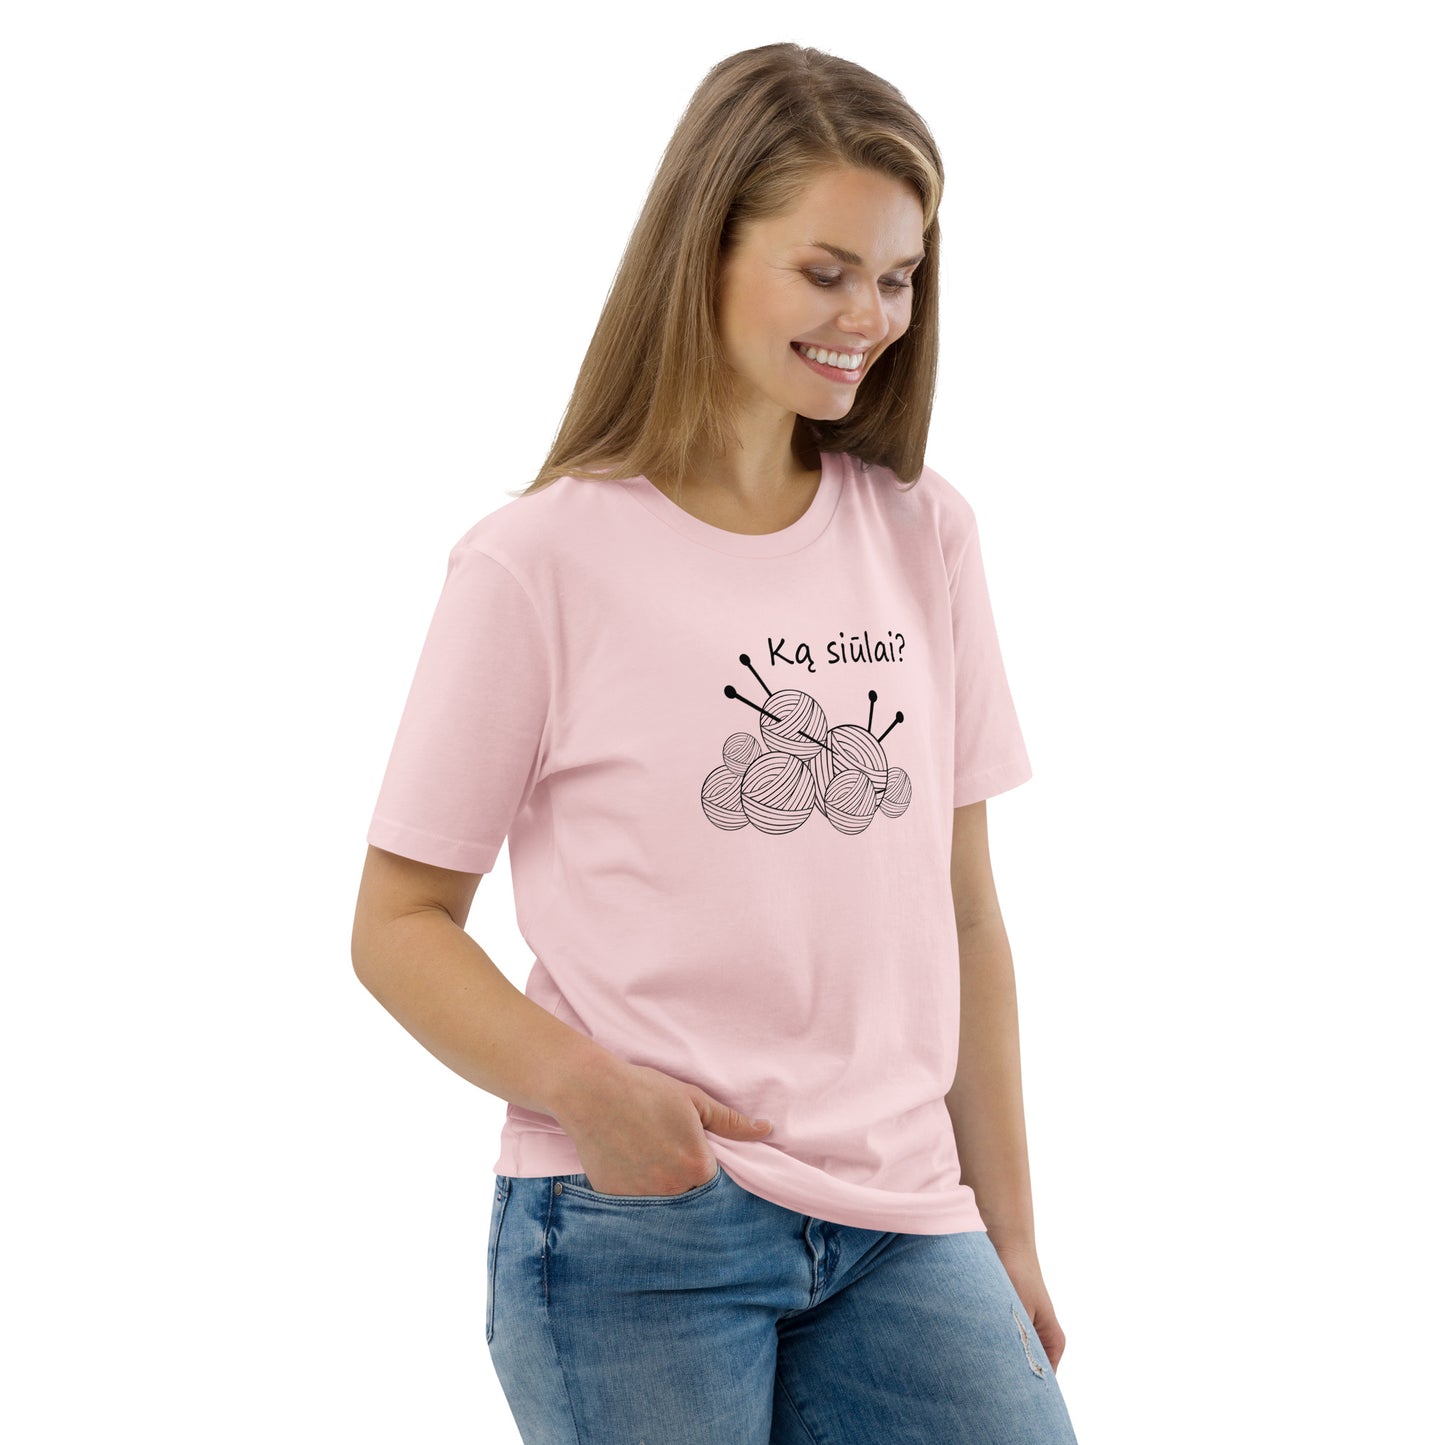 Organic Cotton Unisex T-Shirt: What do you suggest?